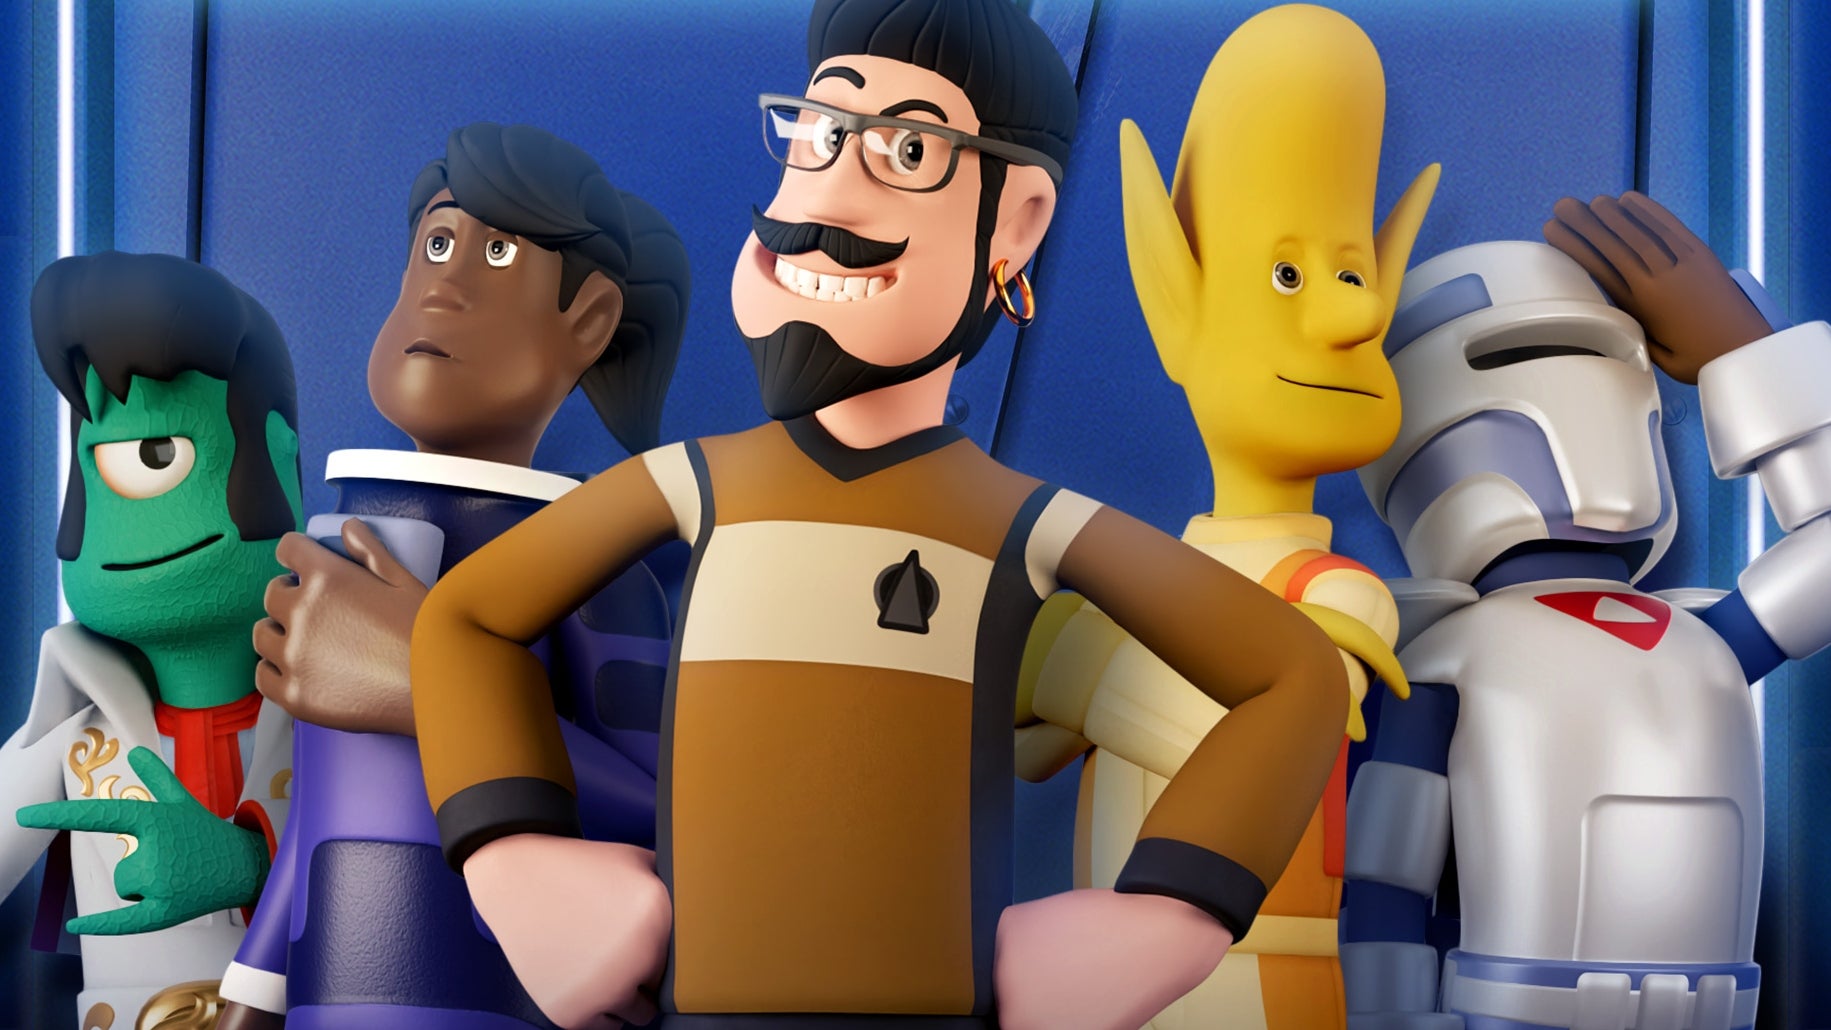 Key art from Two Point Campus' Space Academy expansion showing Captain Roderick Cushion, Space Elvis, a Space Knight, an alien, and an astronaut student